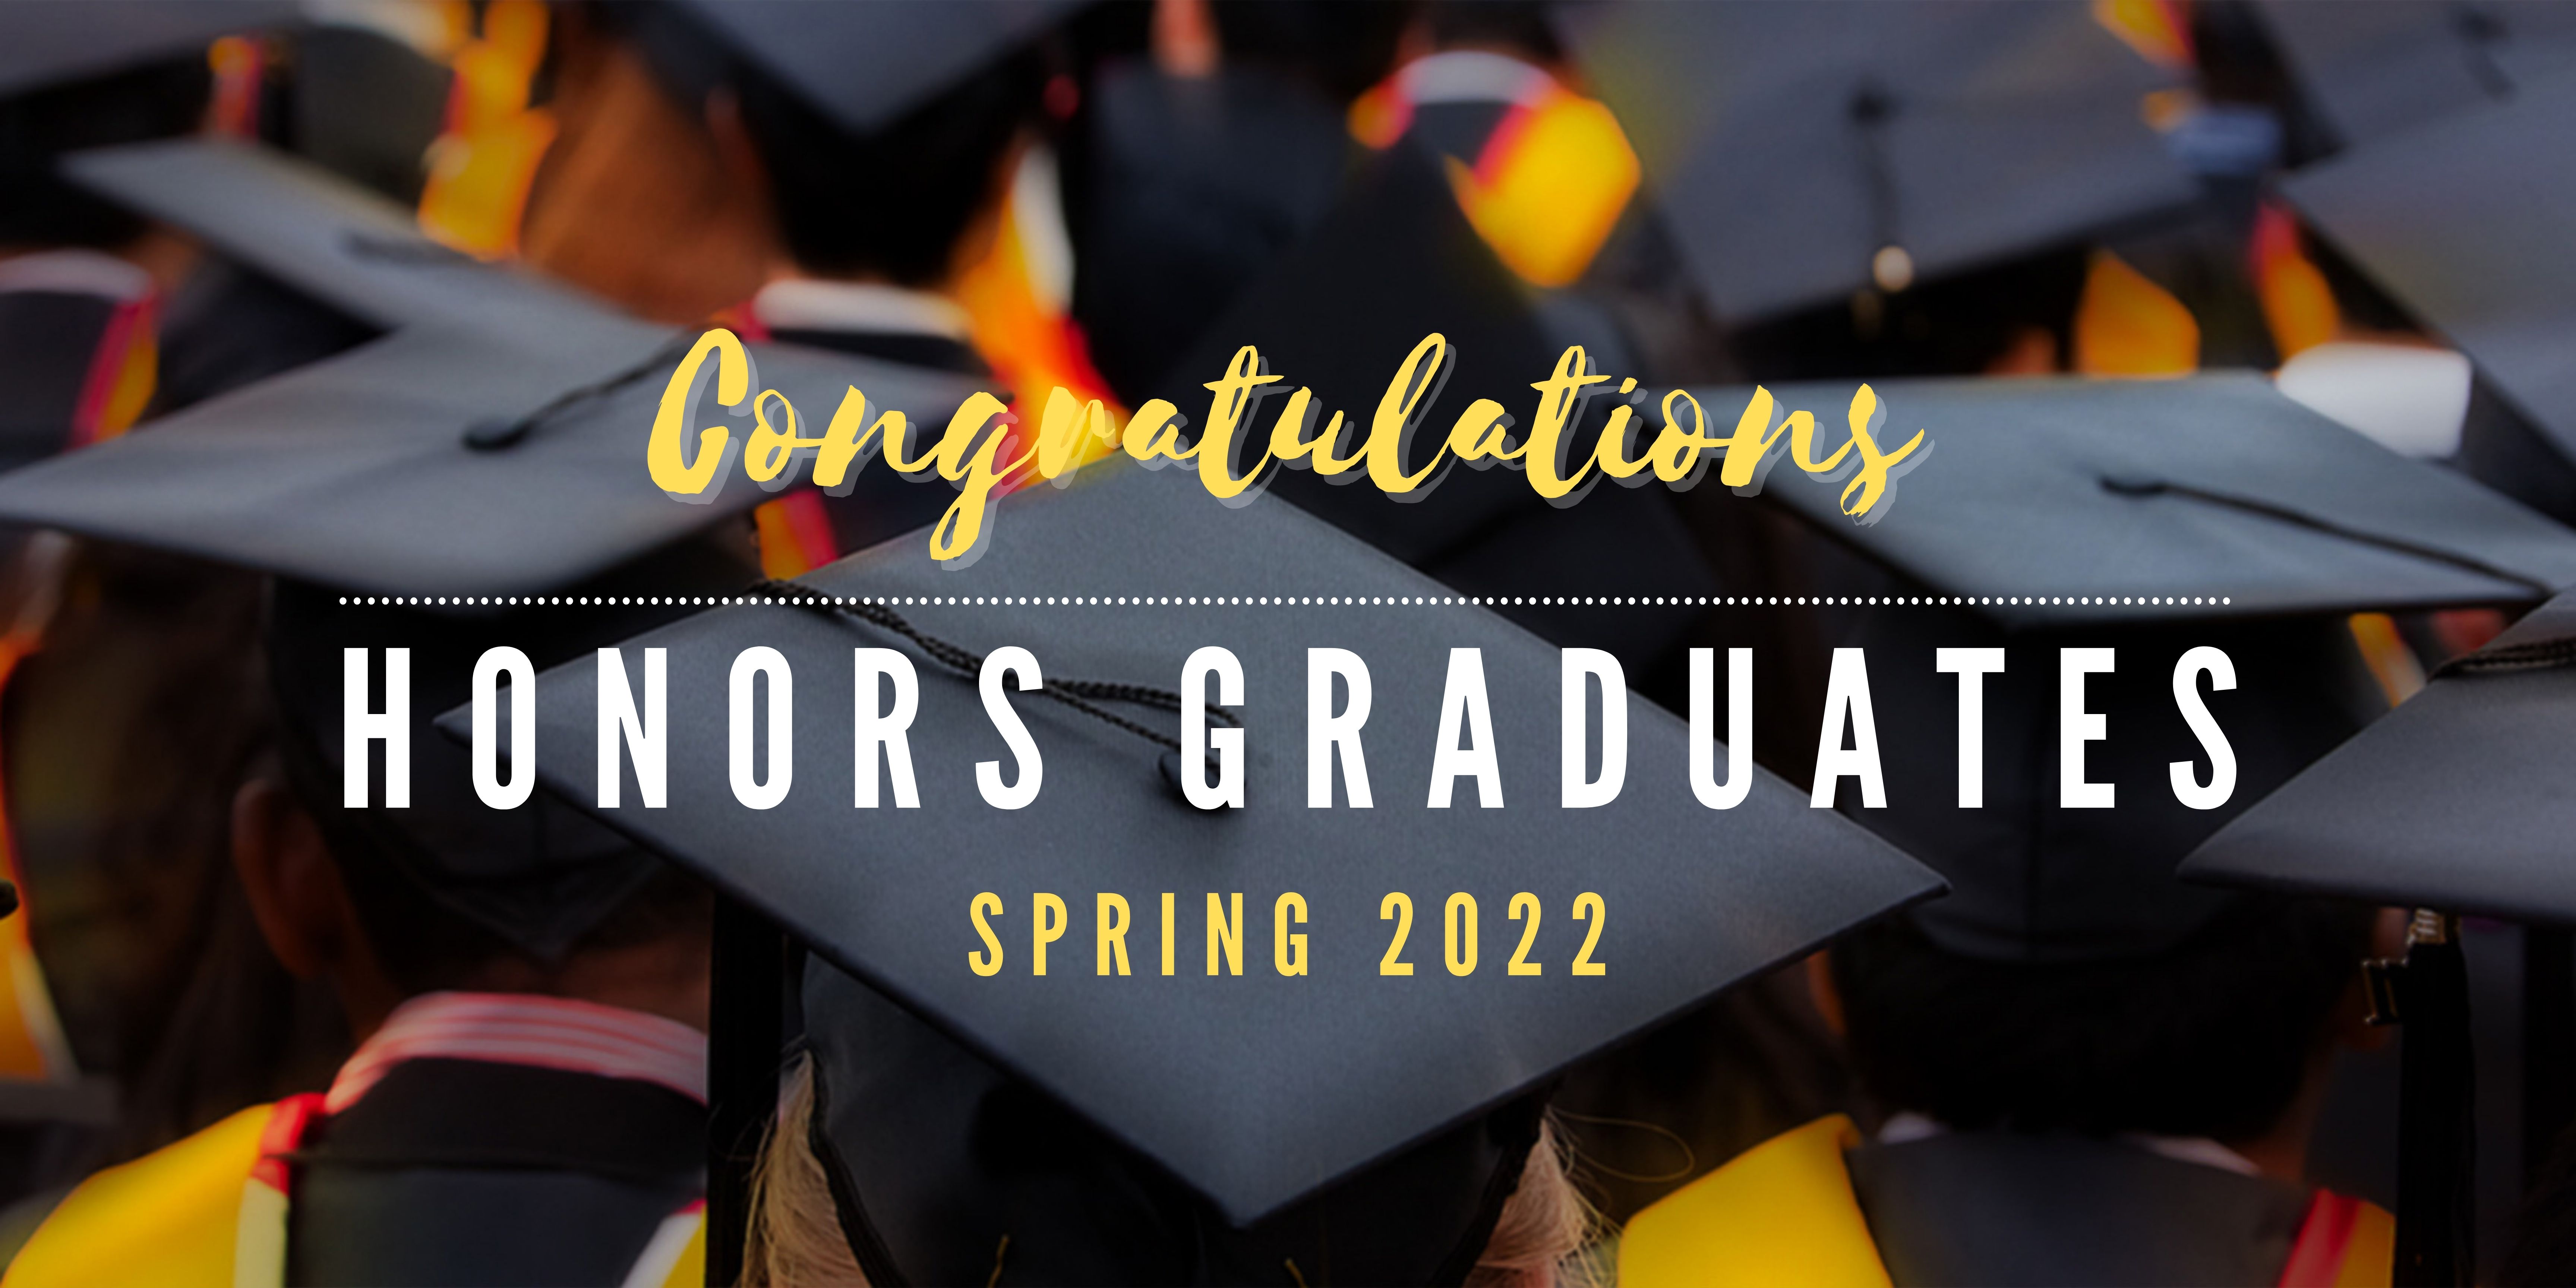 Rectangular graphic displaying the backs of graduation caps. Yellow cursive text at the top reads: "Congratulations" followed by a long white dotted line. Below the line is bold white text which reads: "Honors Graduates," followed by yellow text "Spring 2022" underneath.